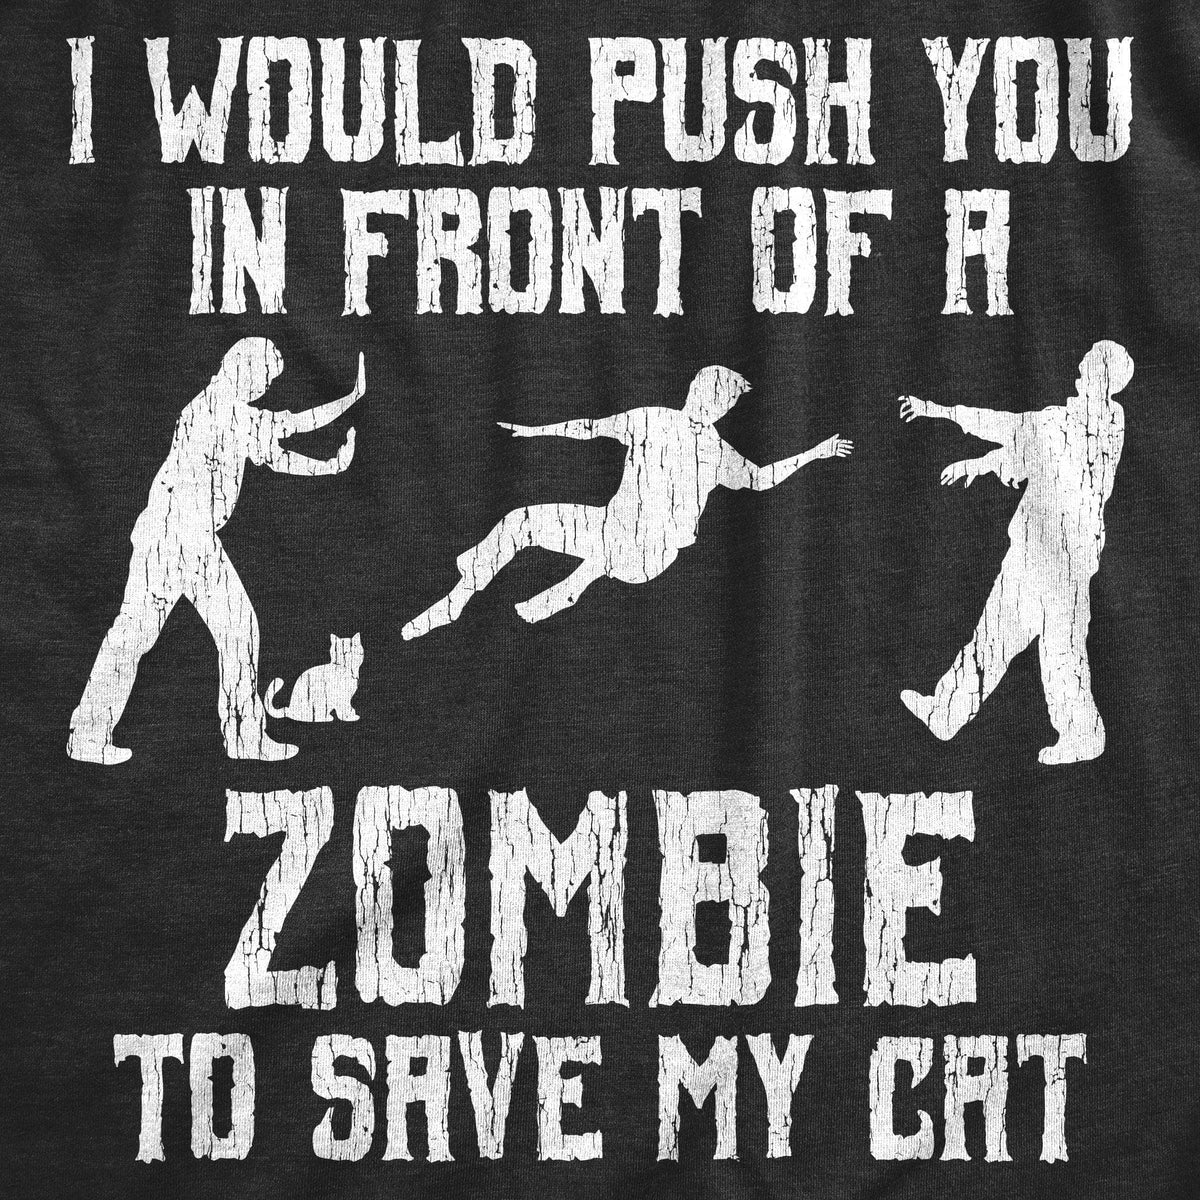 I Would Push You In Front Of A Zombie To Save My Cat Men&#39;s Tshirt - Crazy Dog T-Shirts